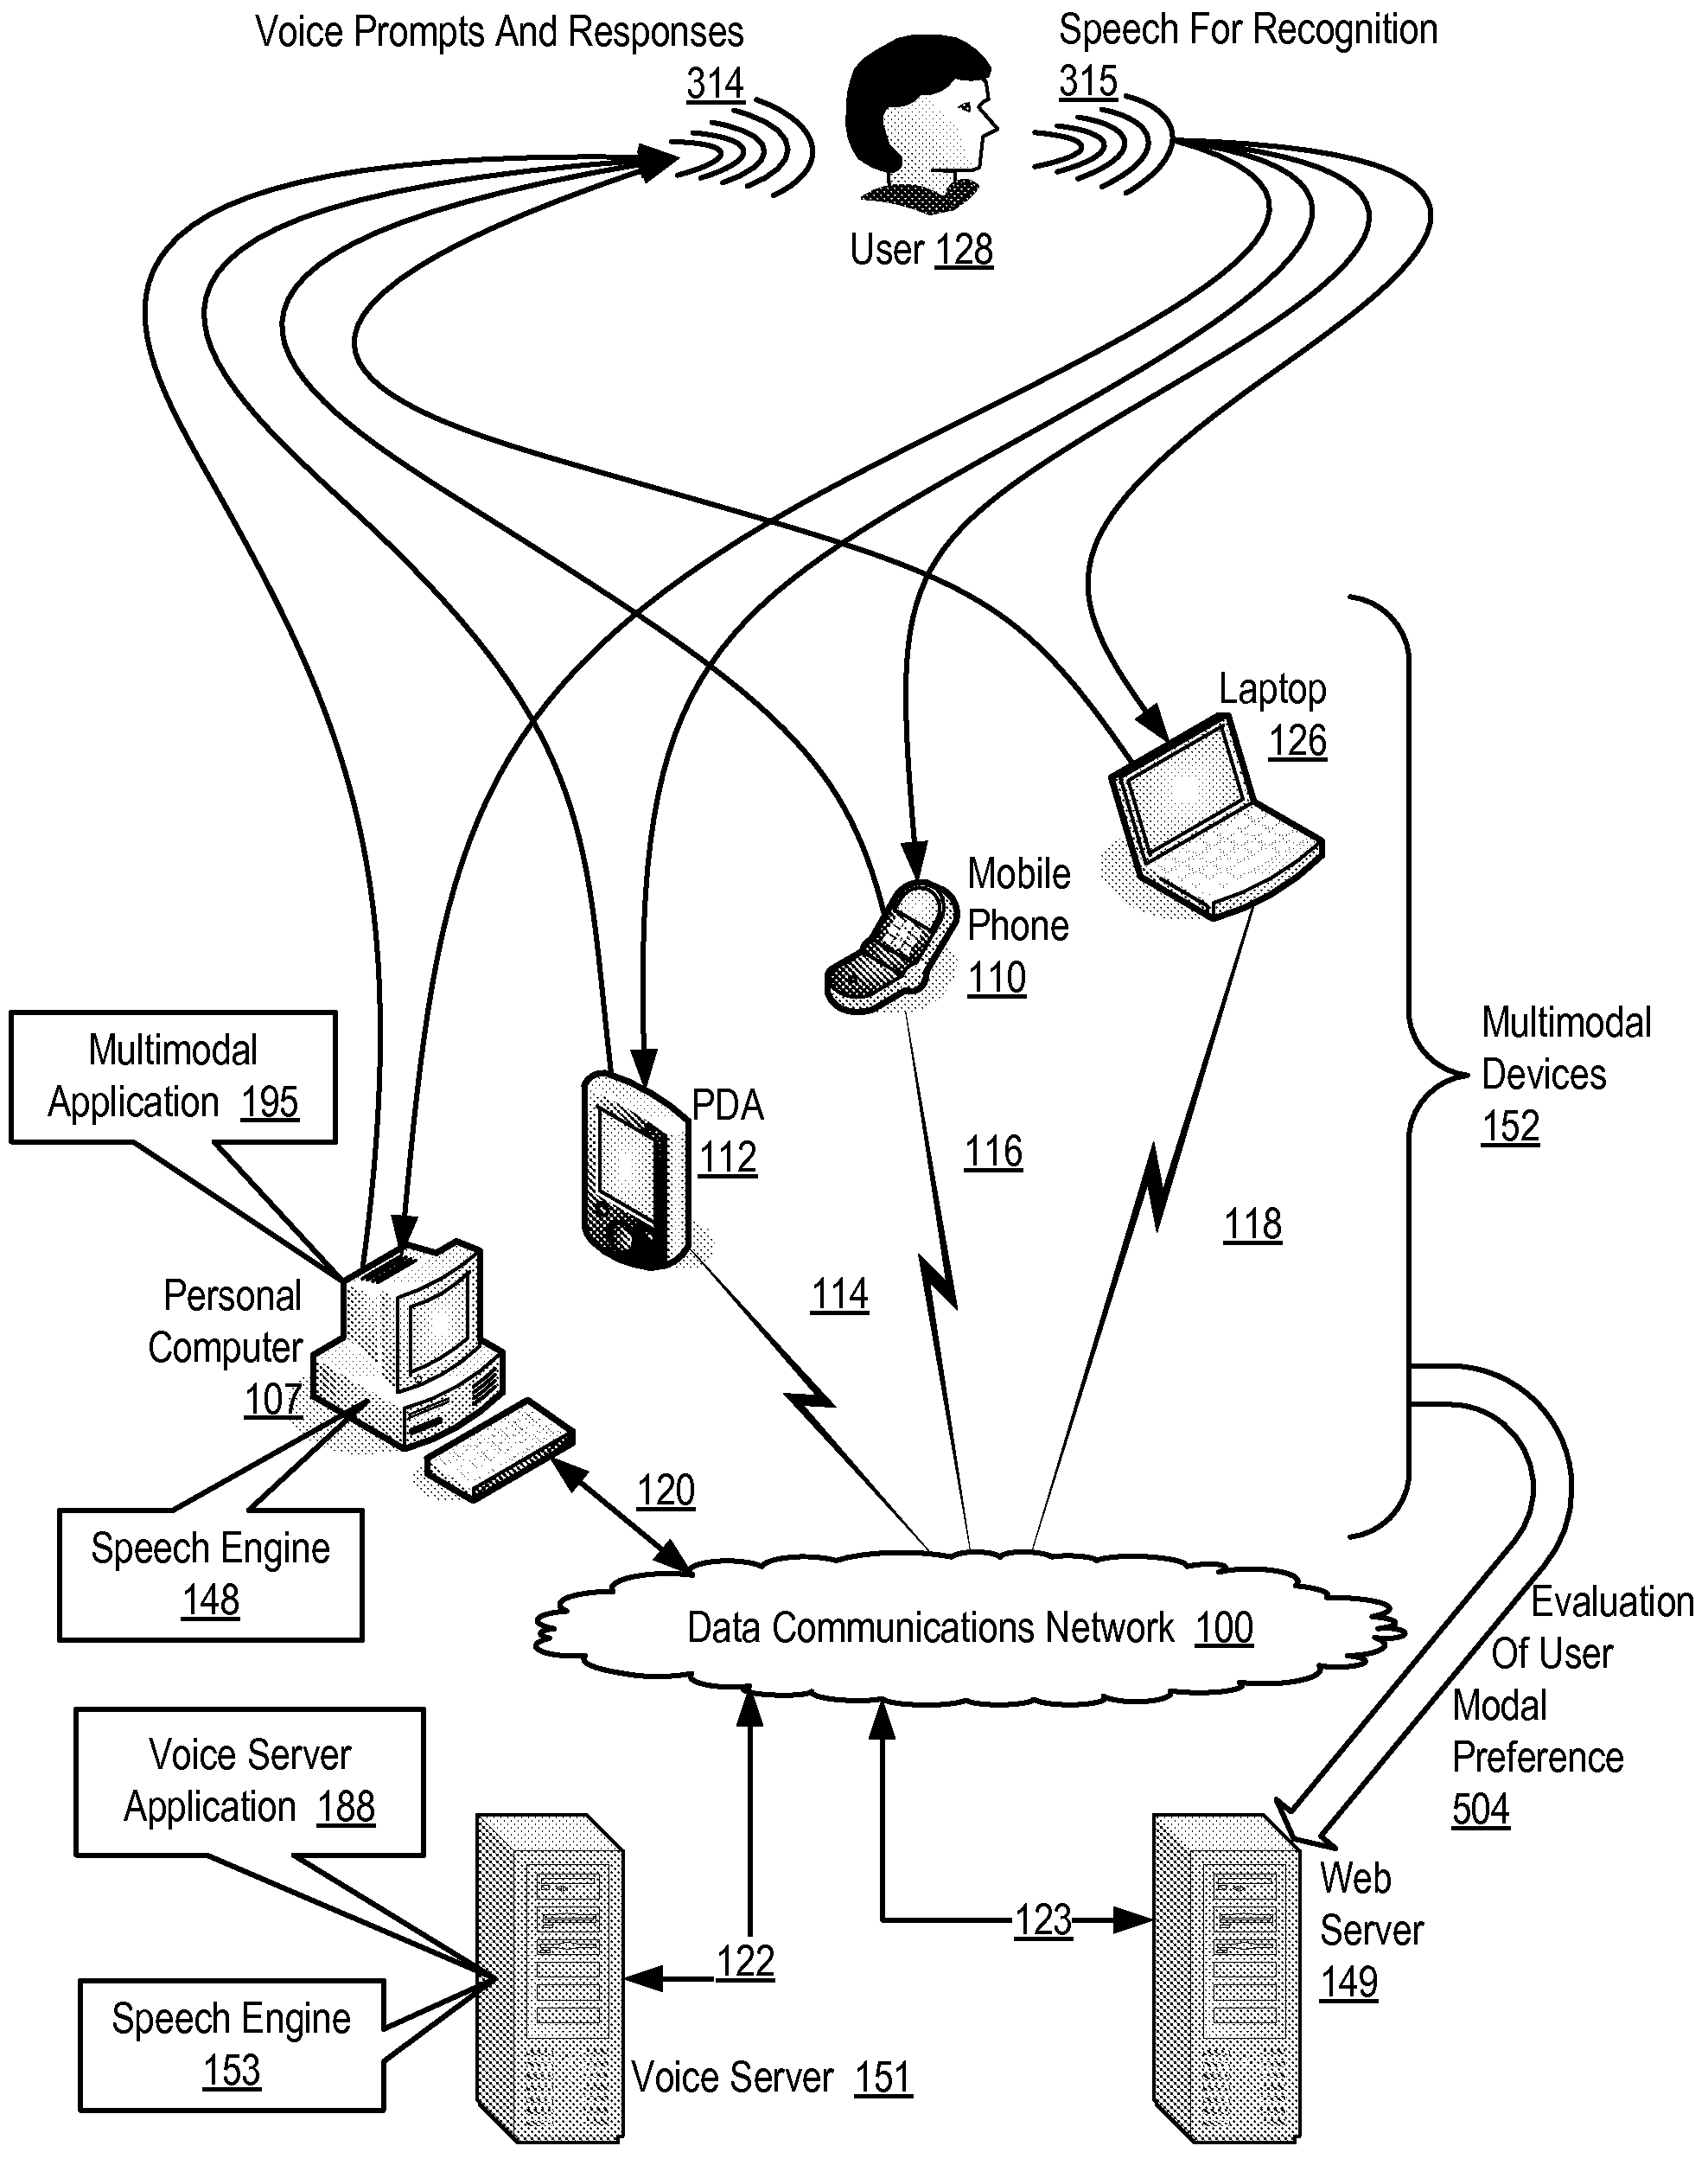 Establishing a Preferred Mode of Interaction Between a User and a Multimodal Application